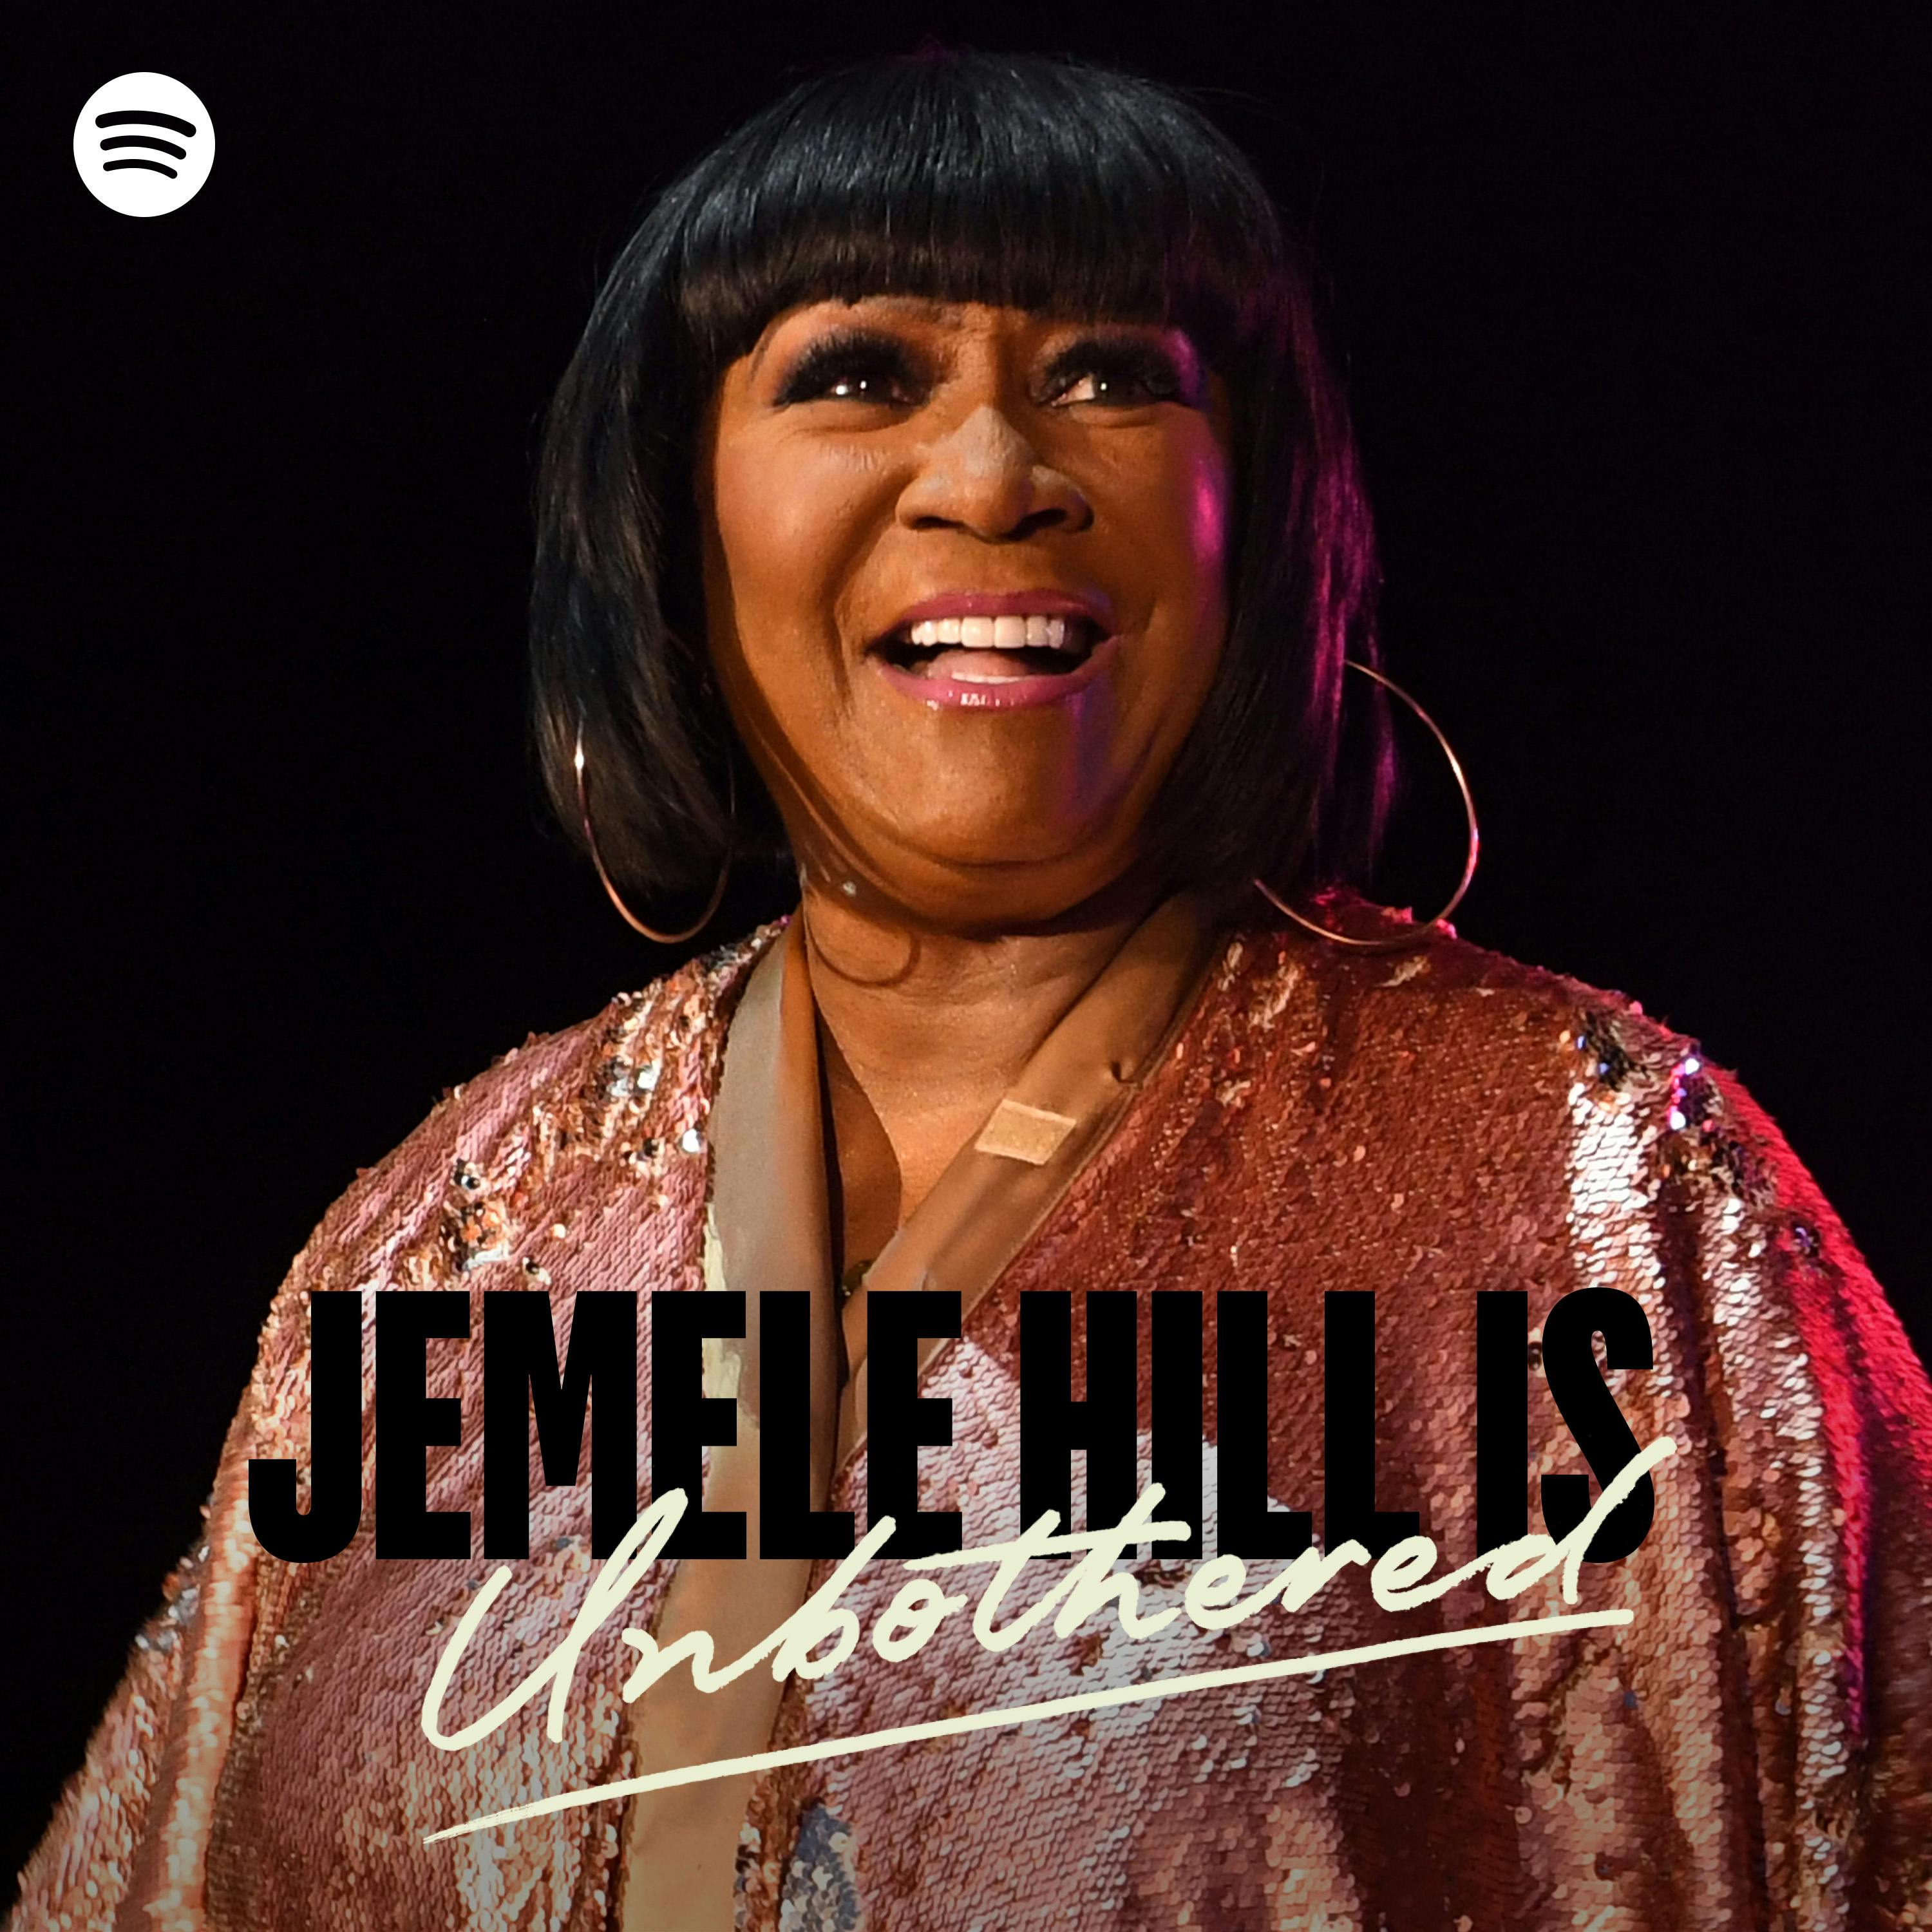 Ep 151: PATTI LABELLE - Just being Patti